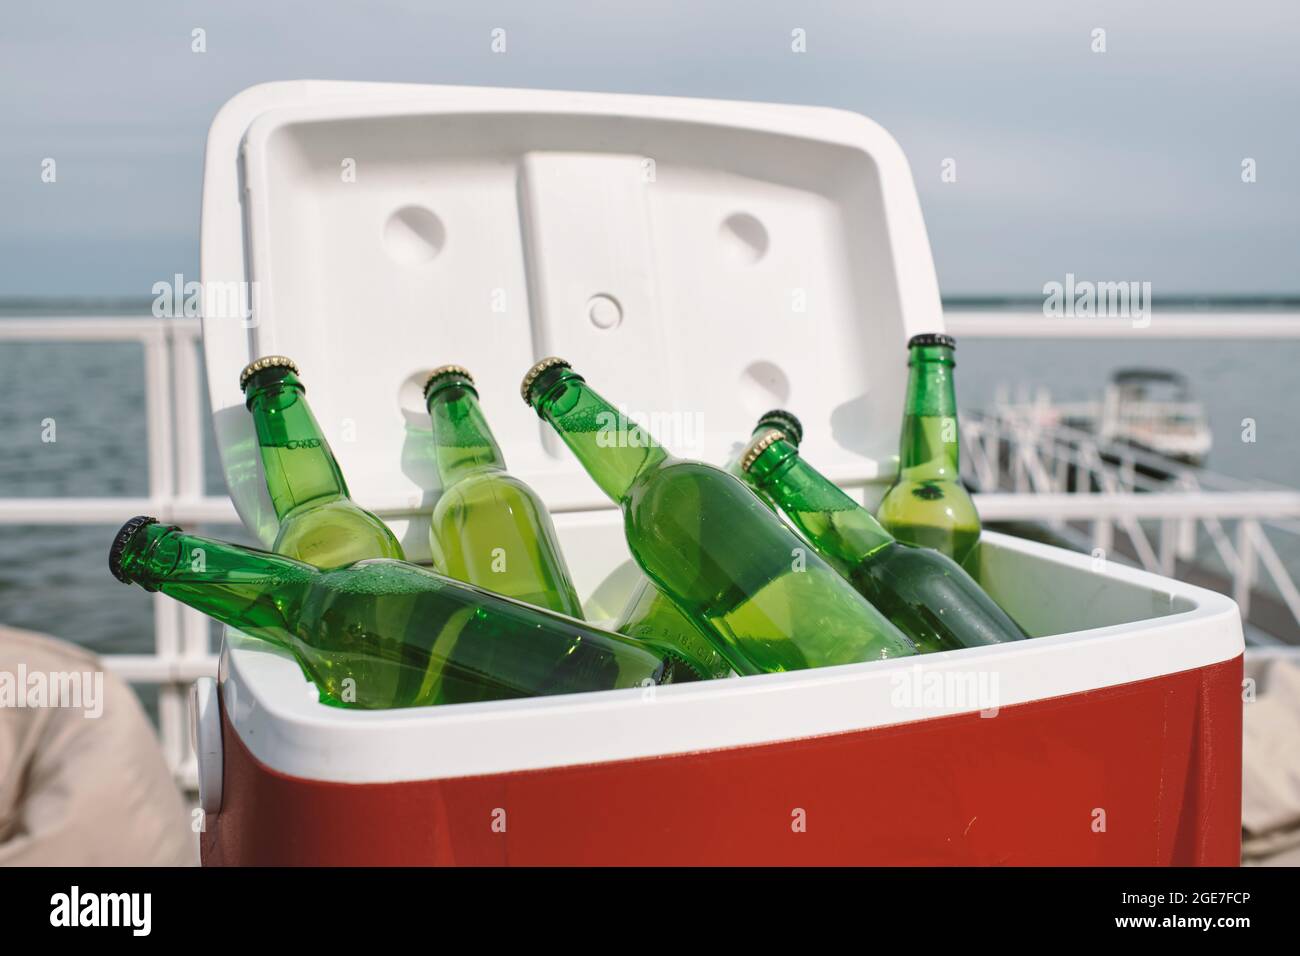 Cooler box with glass of refreshing drinks or beer prepared for birthday party Stock Photo